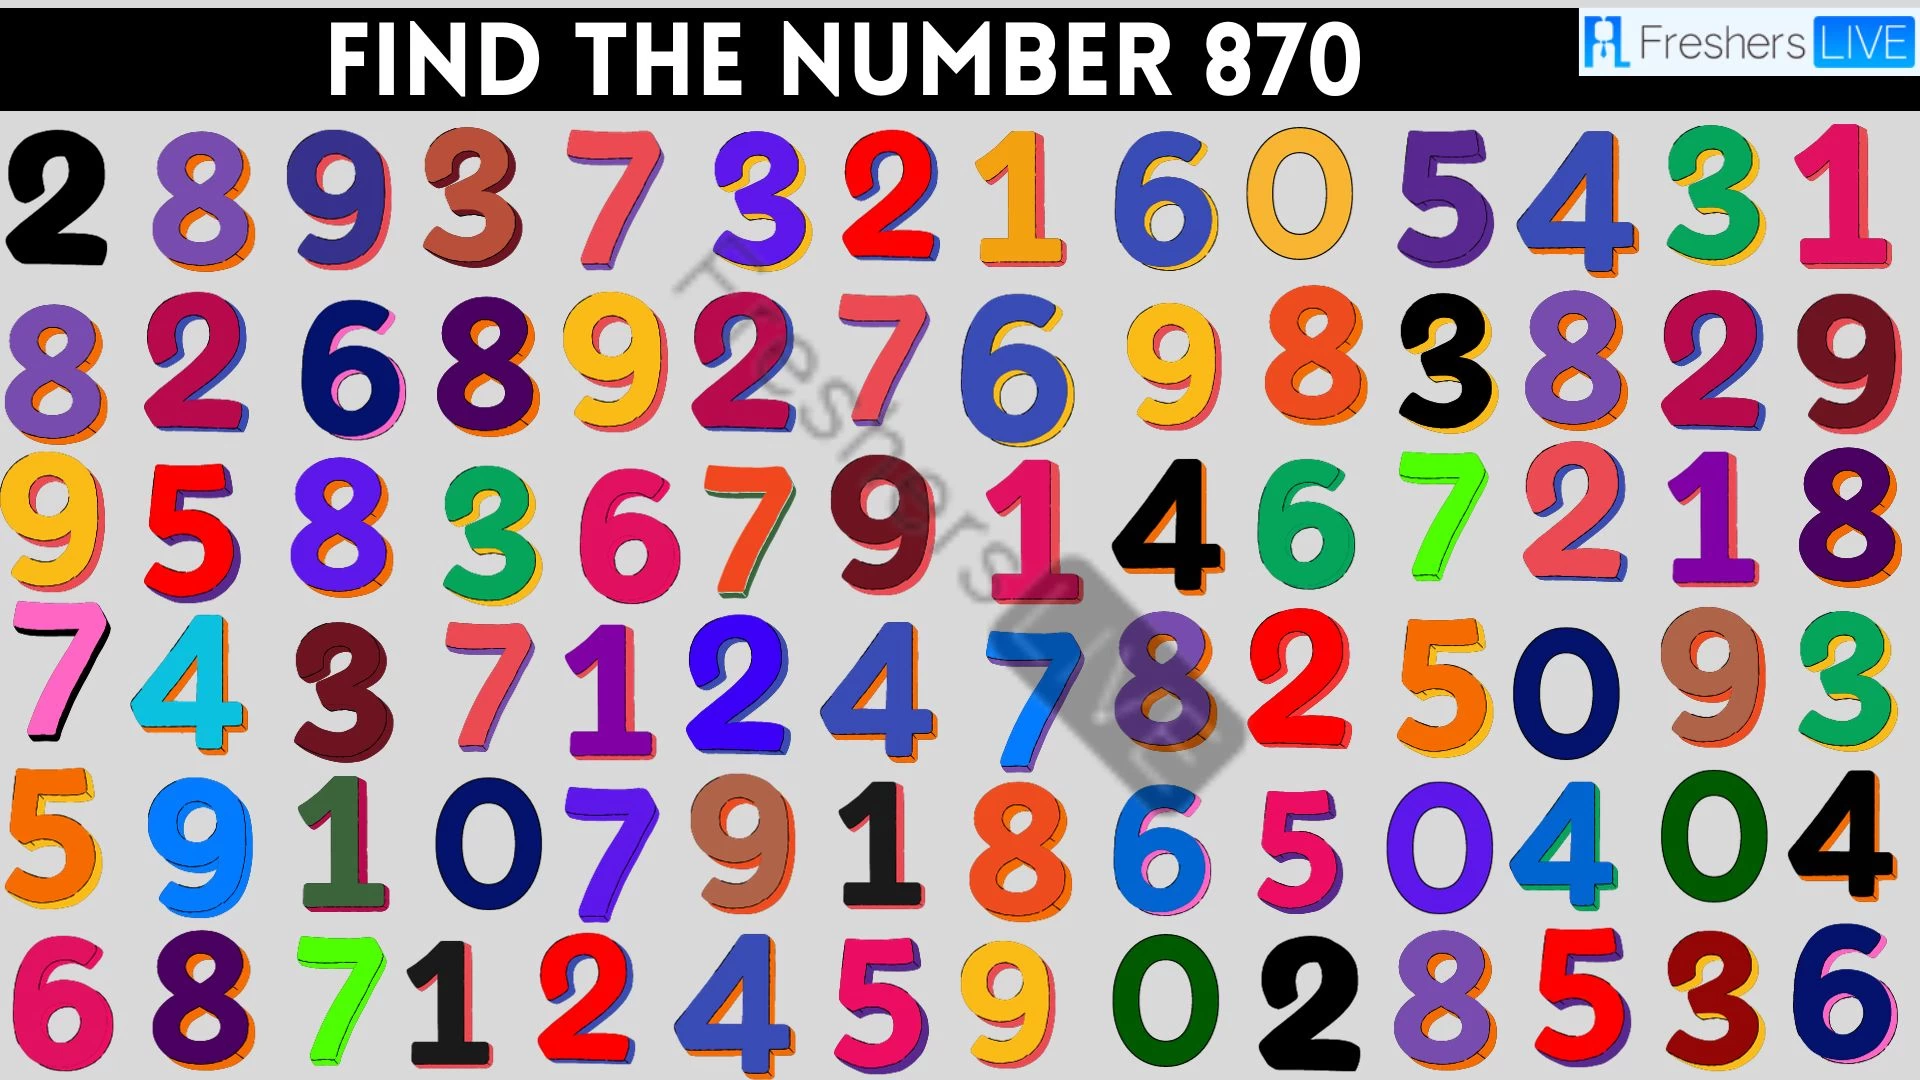 Test Your Lateral Thinking Skills Find the Number 870 Within 10 Seconds